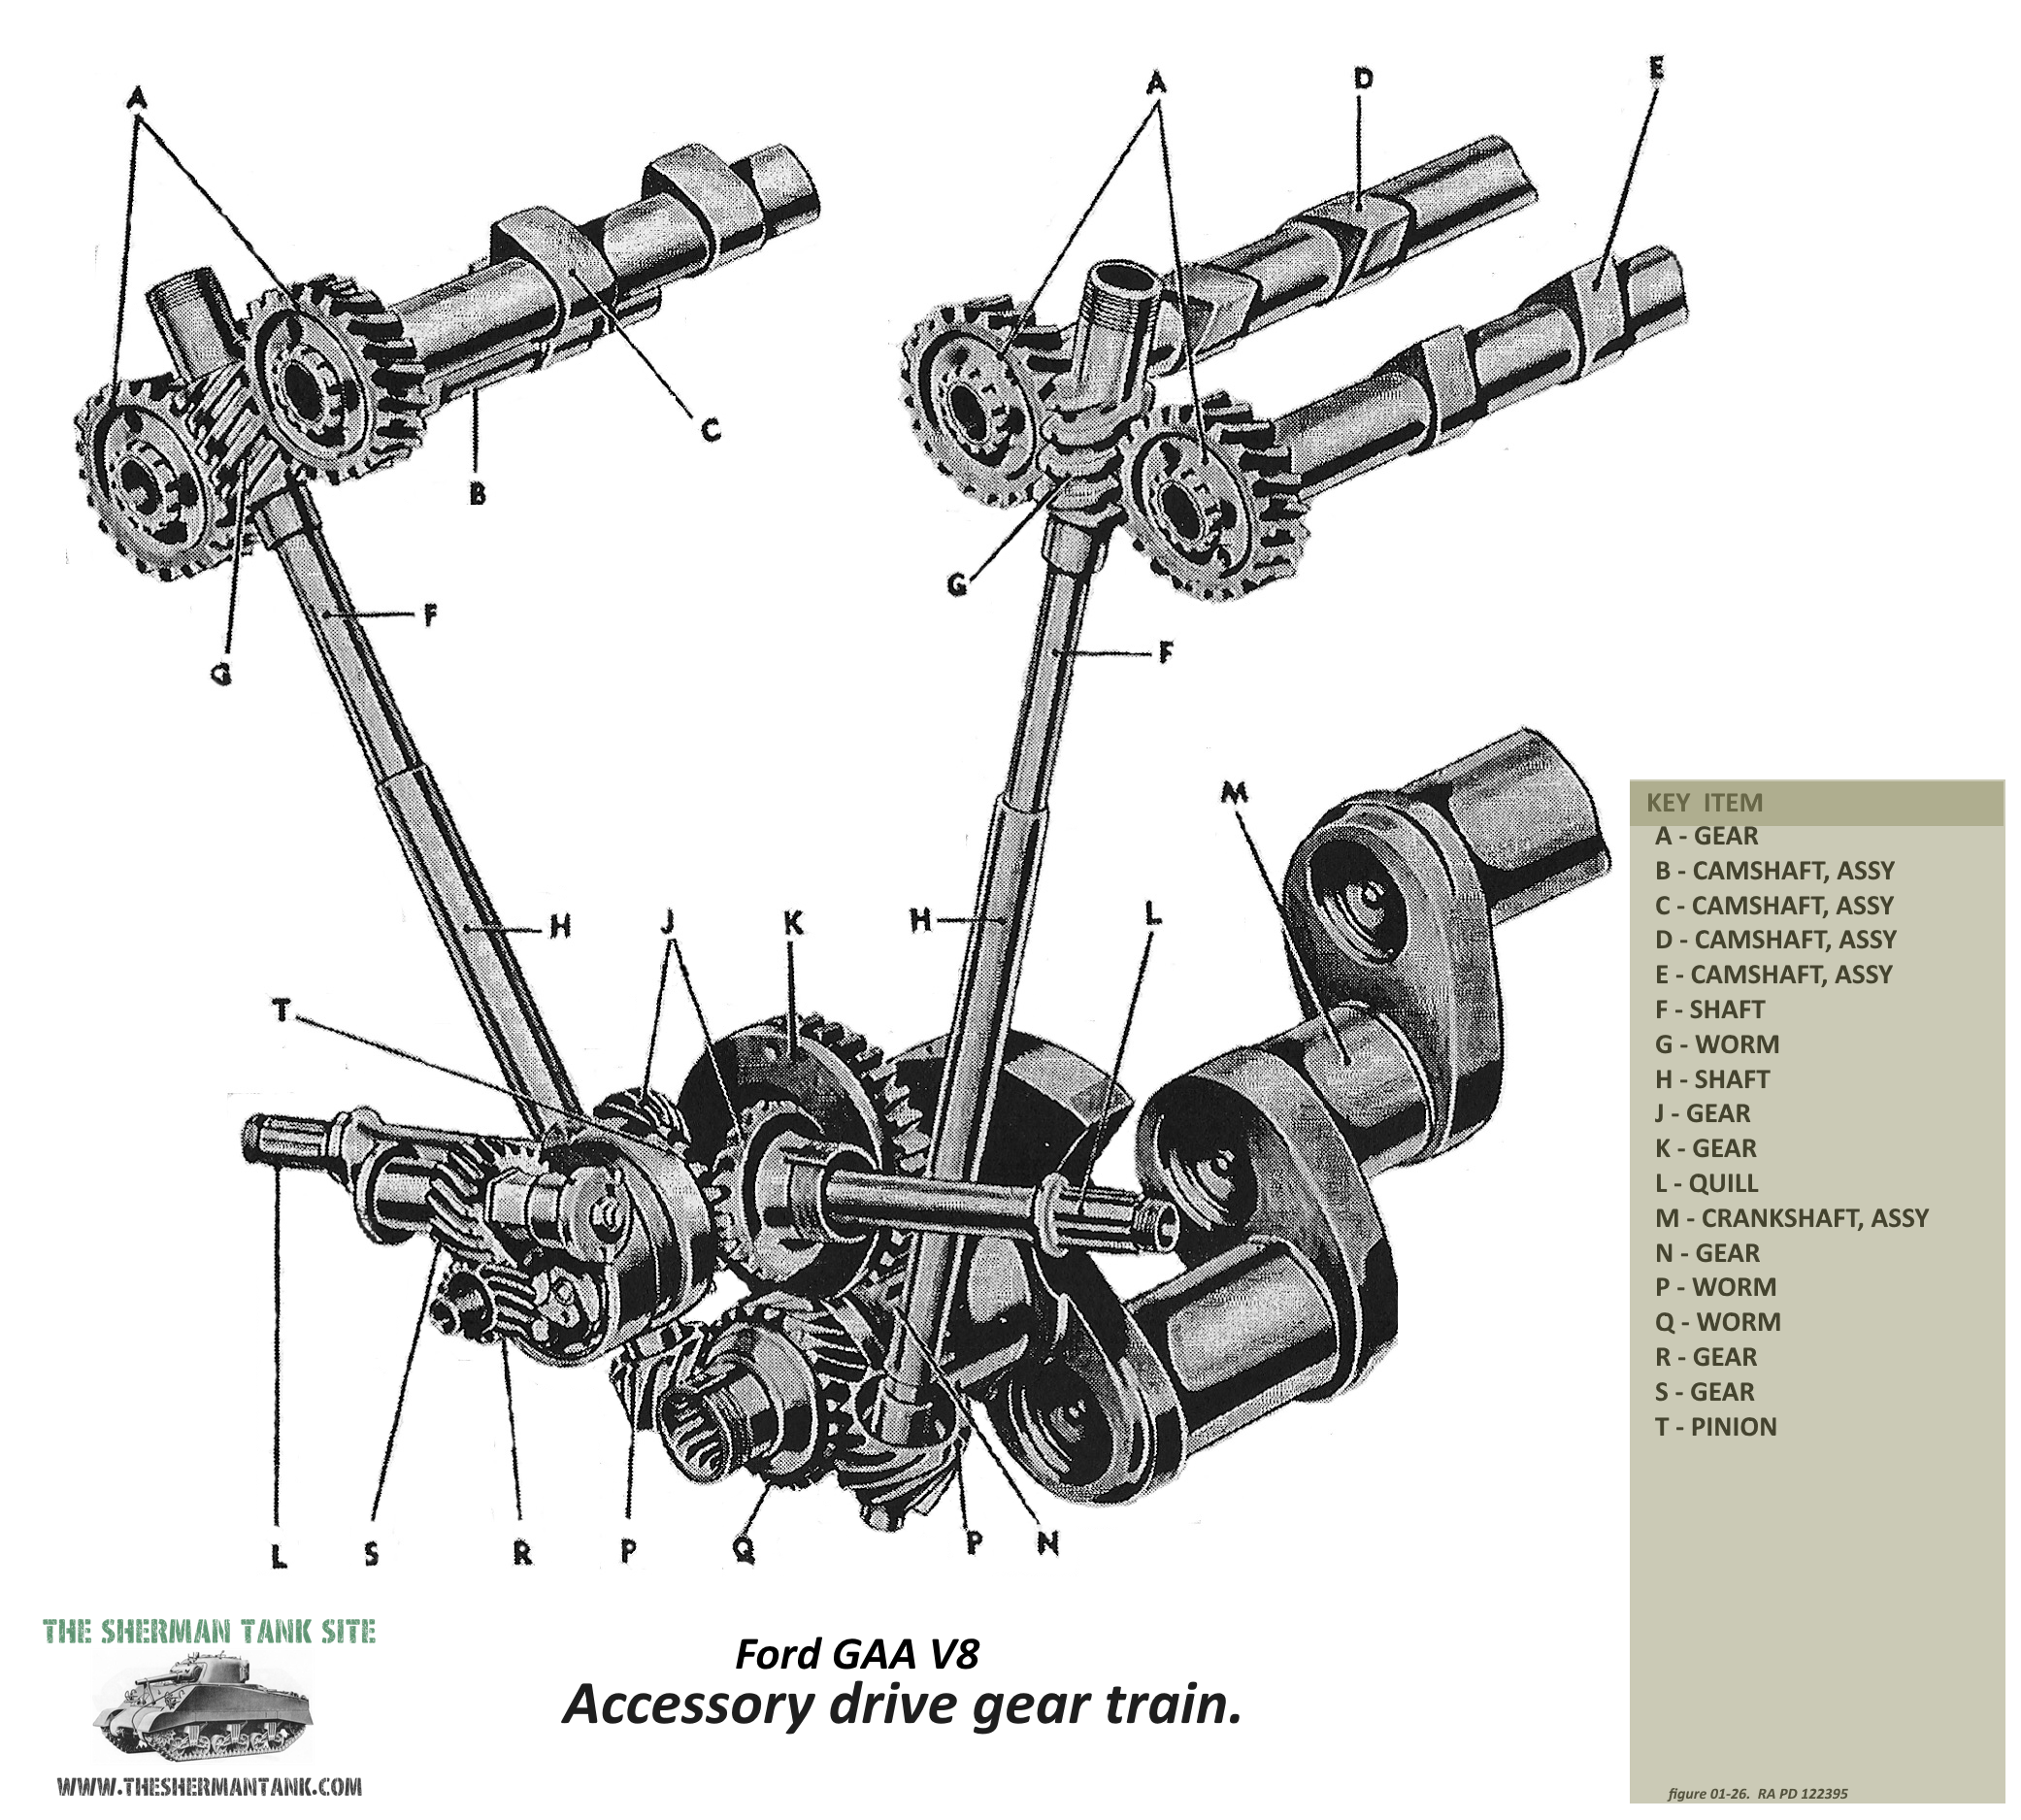 Accessory-drive-gear-train-cams-included